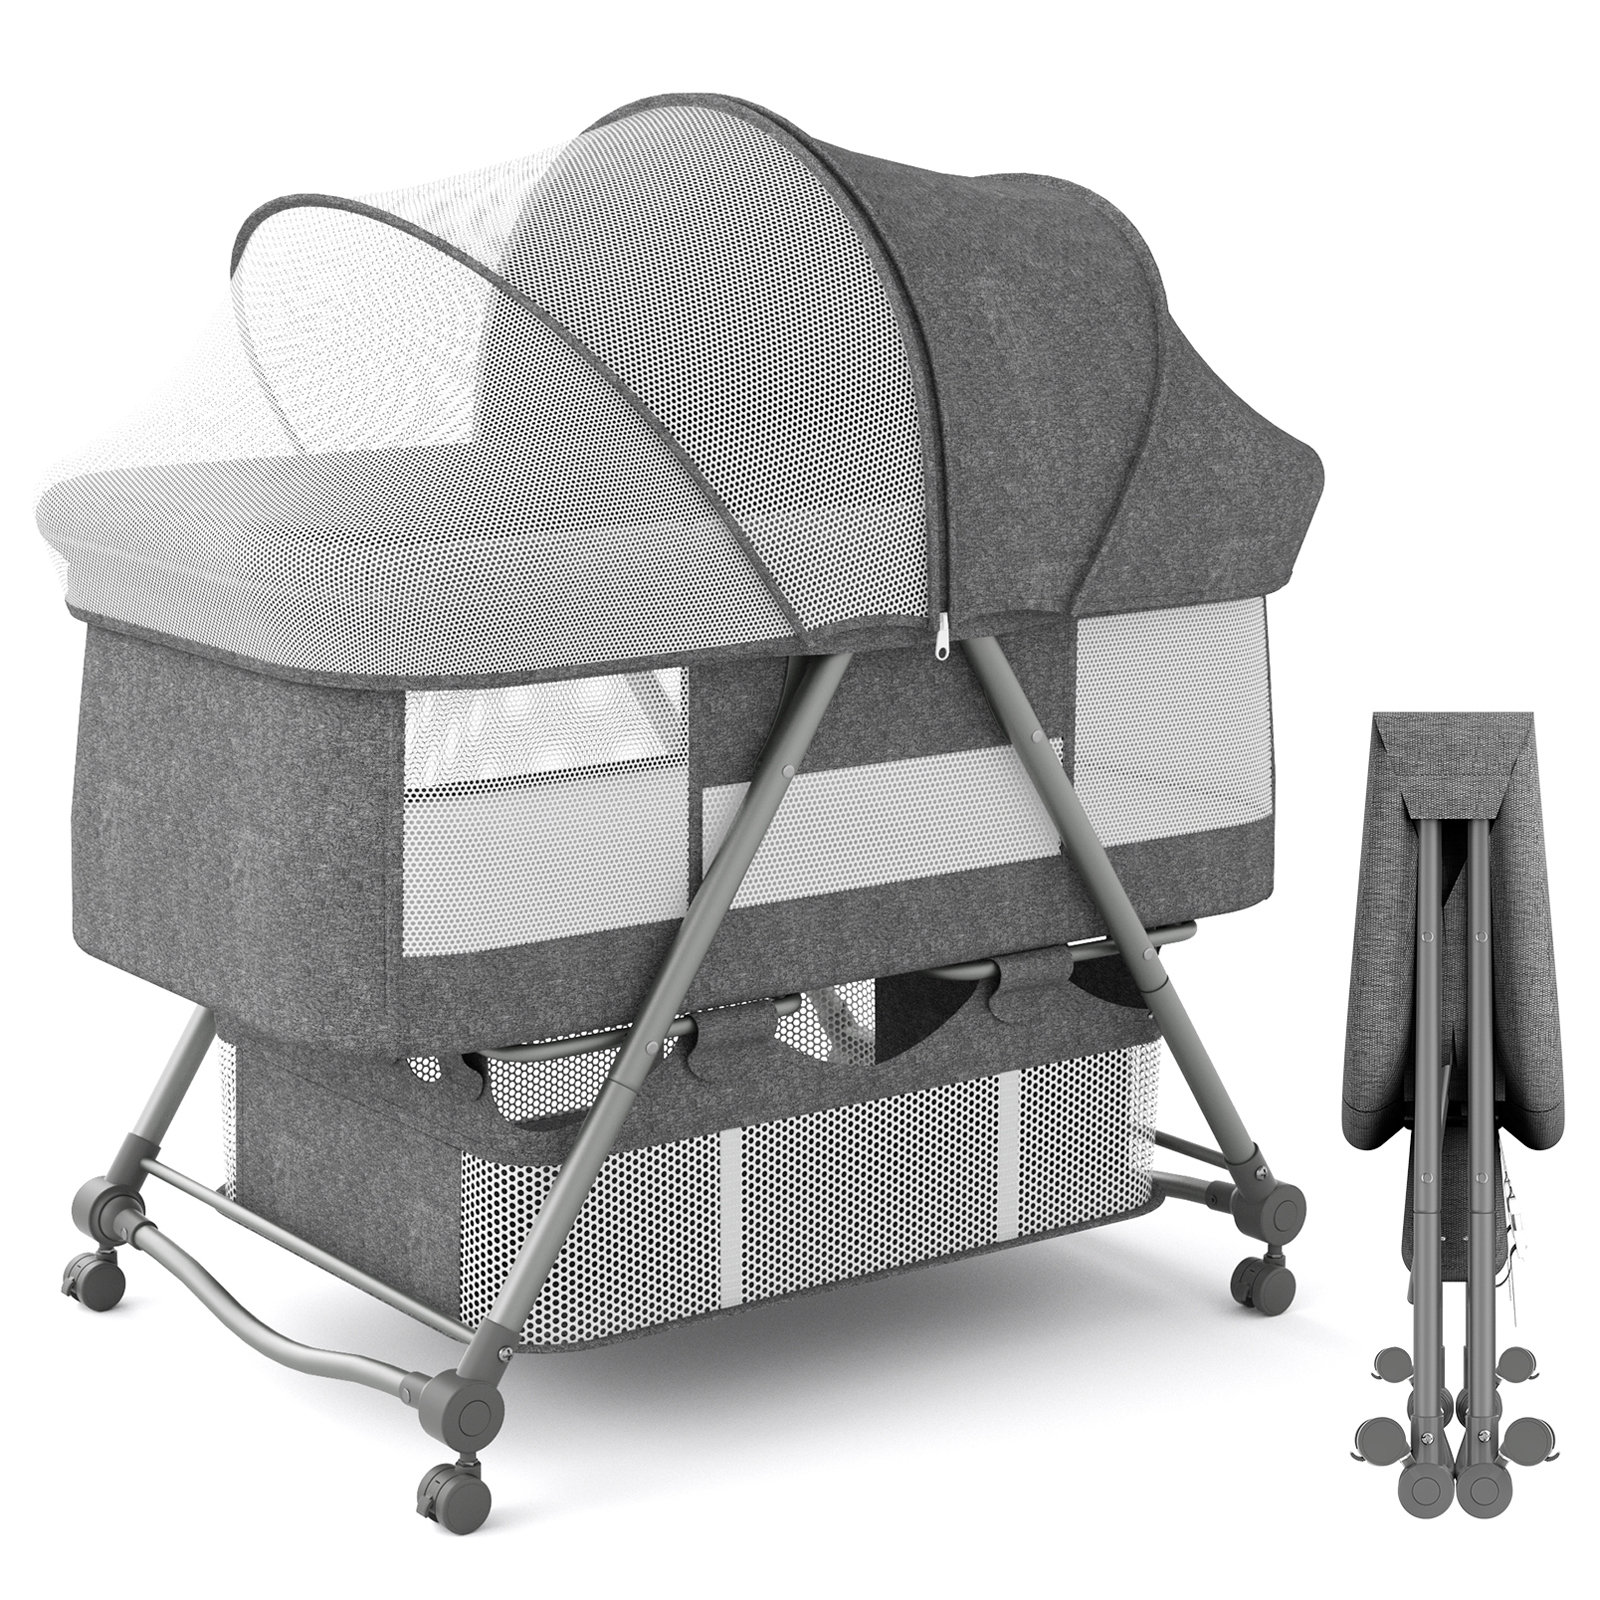 Isabelle & Max™ Bassinet with Mattress & Reviews